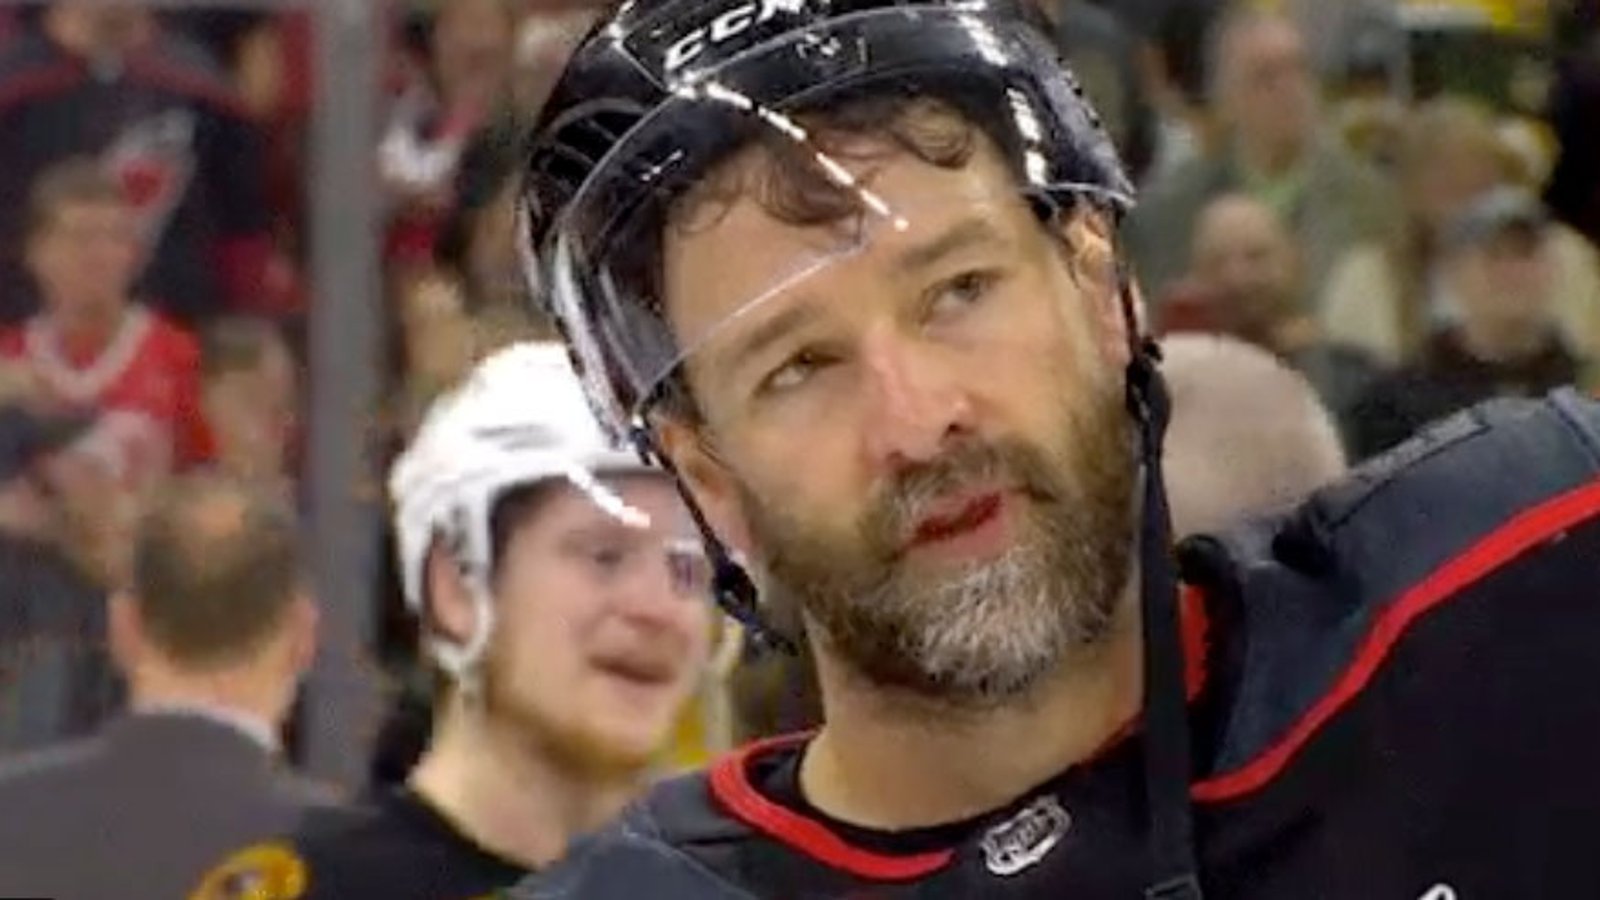 An emotional Justin Williams comforts his crying kids once off the ice